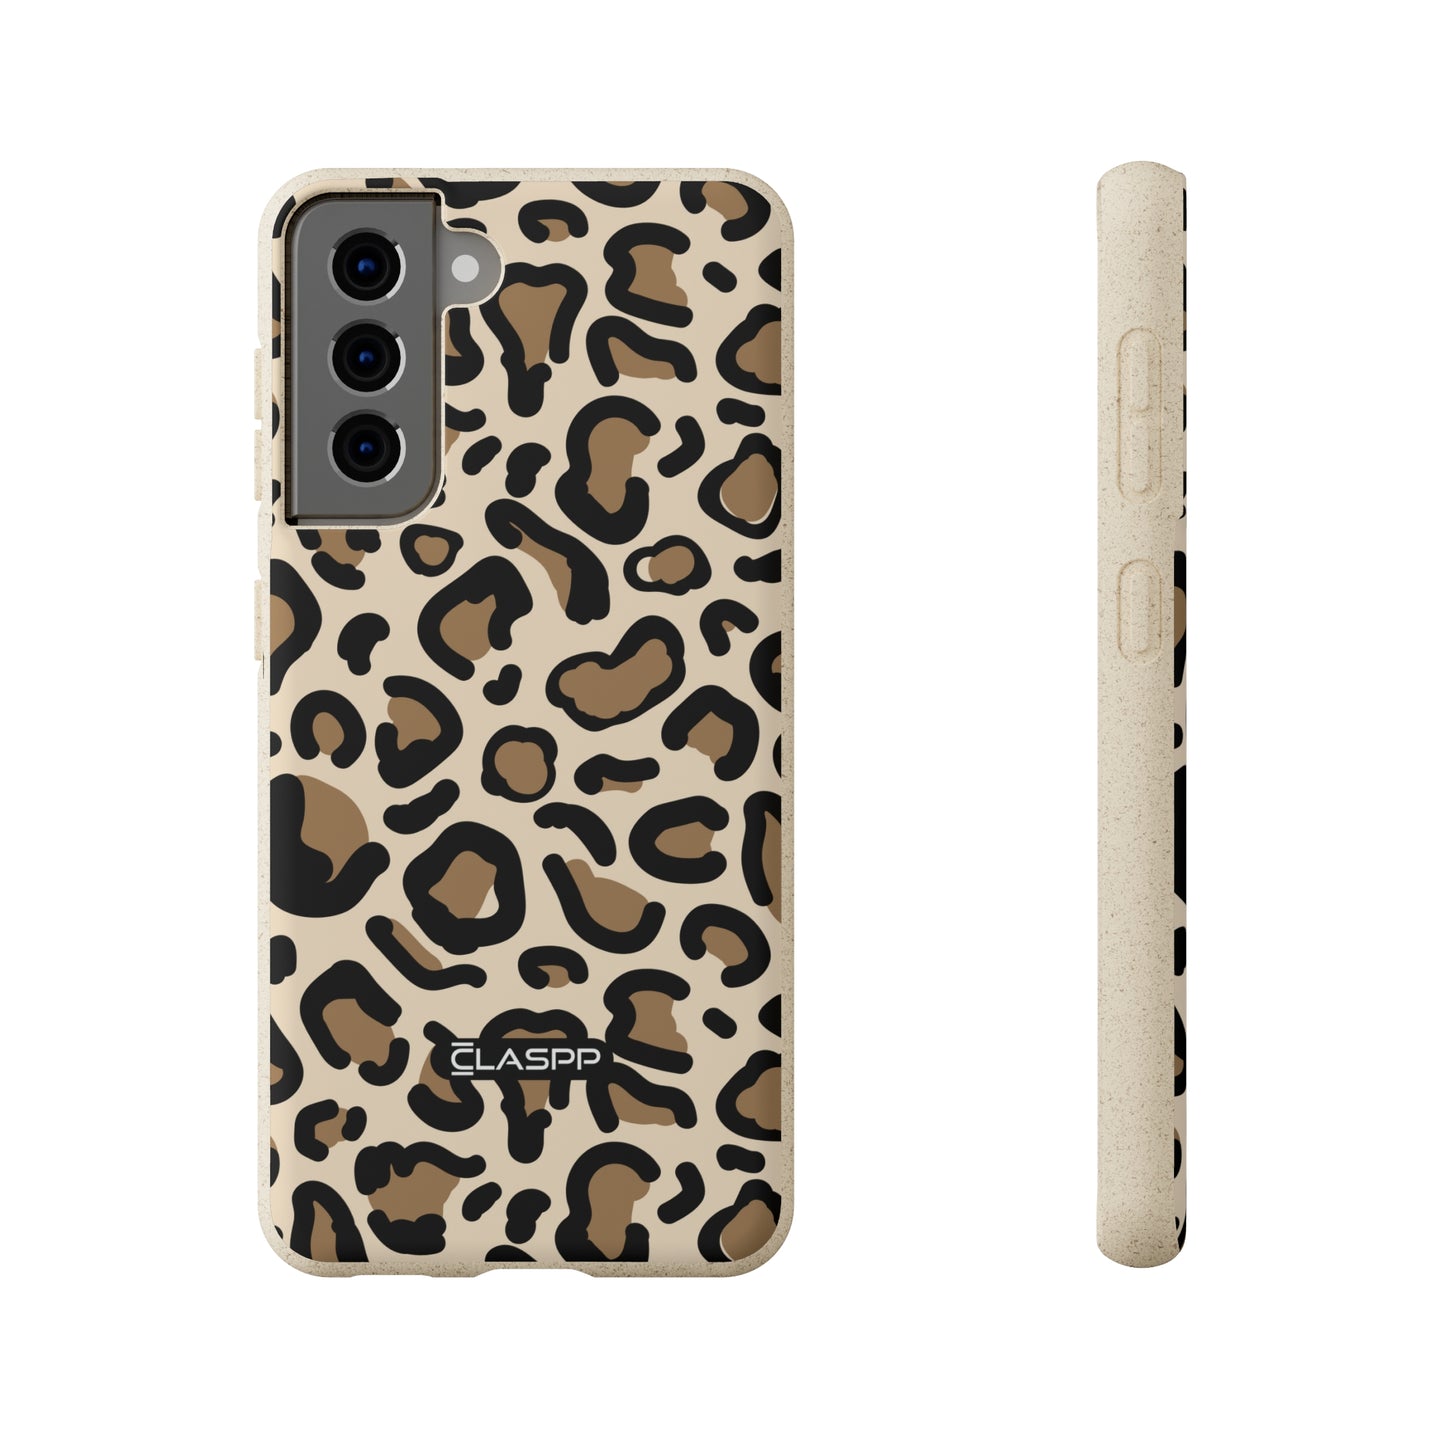 Snowy Leopard | Protective Biodegradable